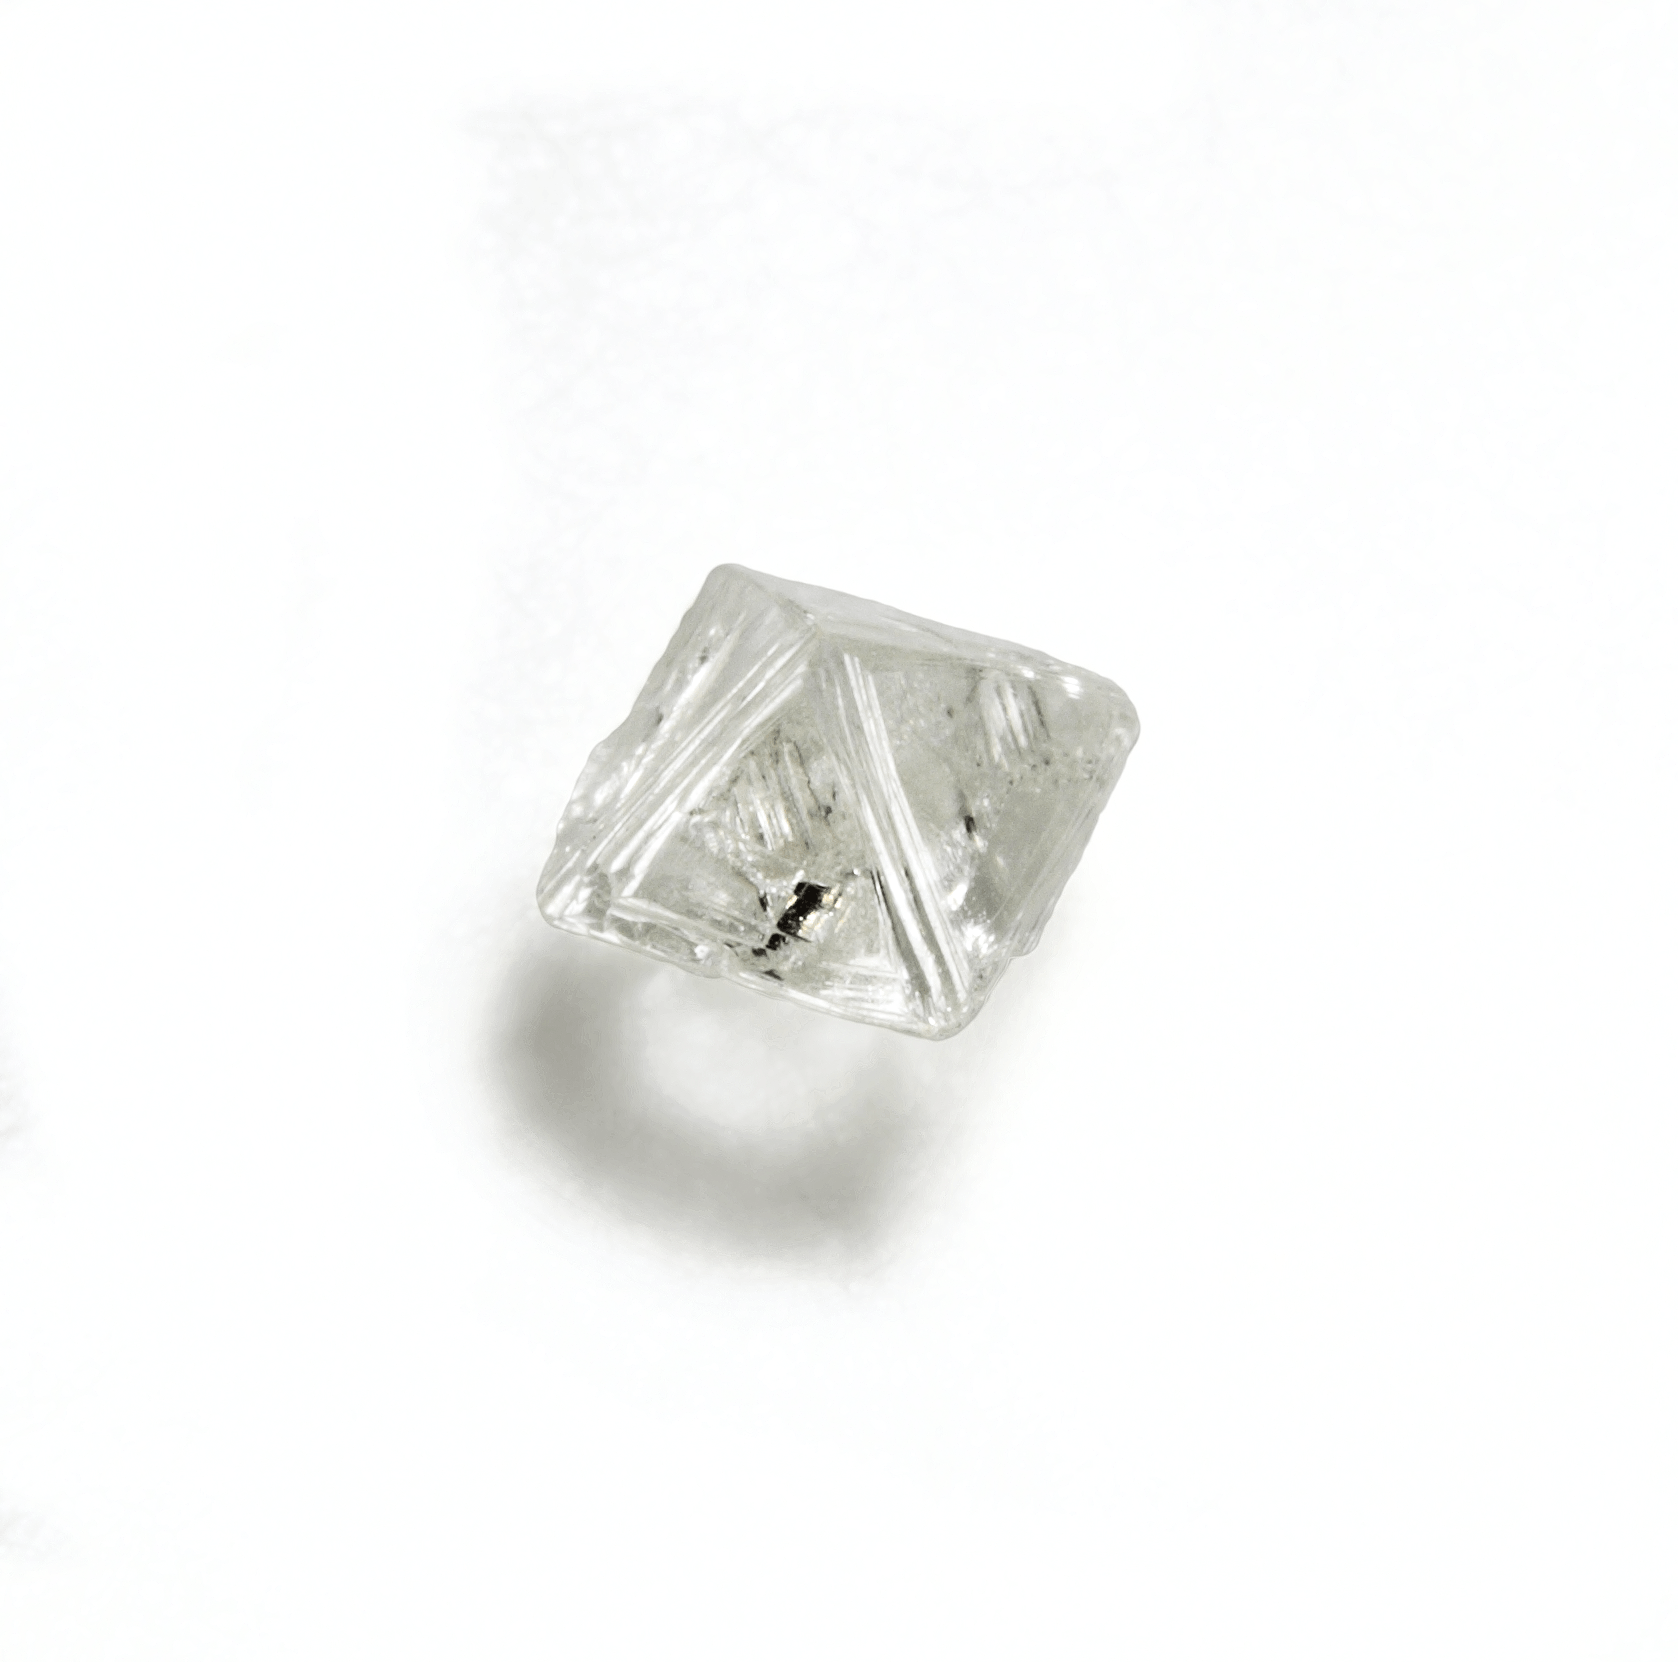 Black Diamonds: A Buying Guide